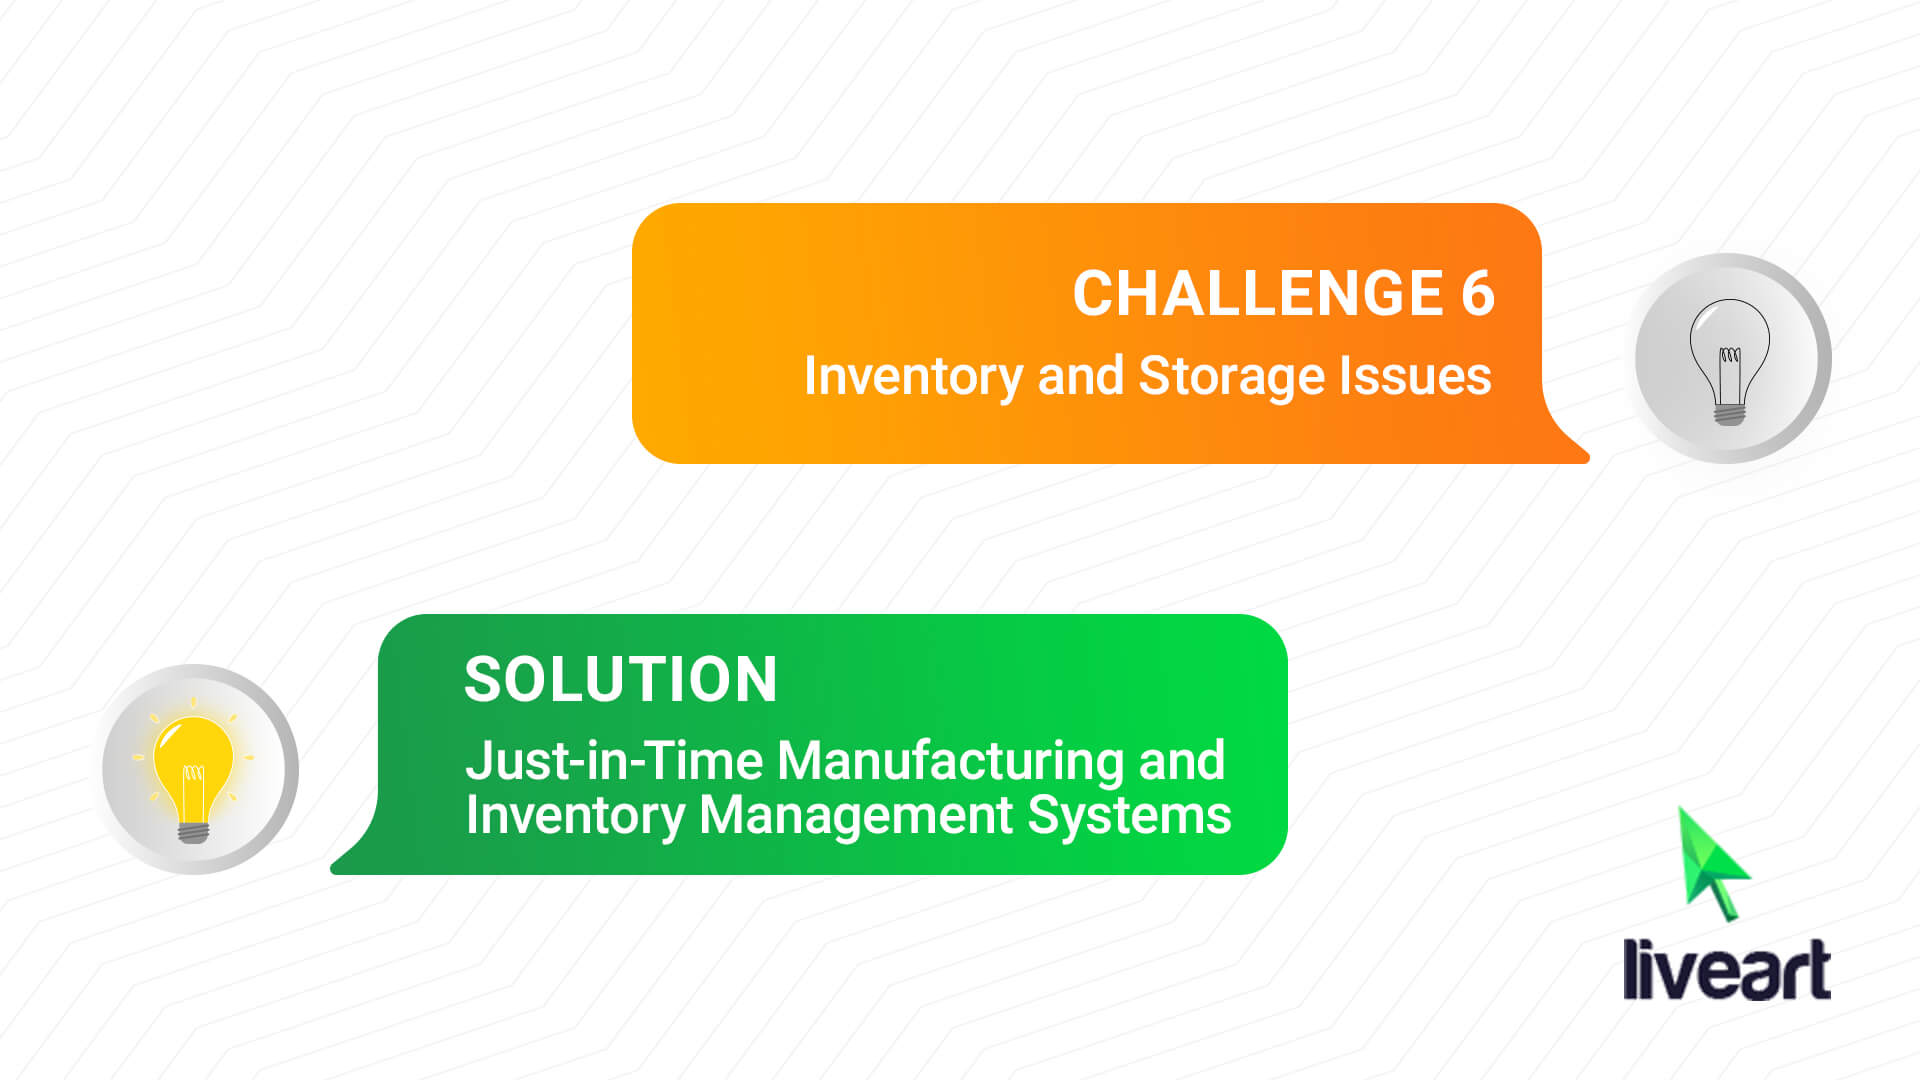 Challenge 6: Inventory and Storage Issues